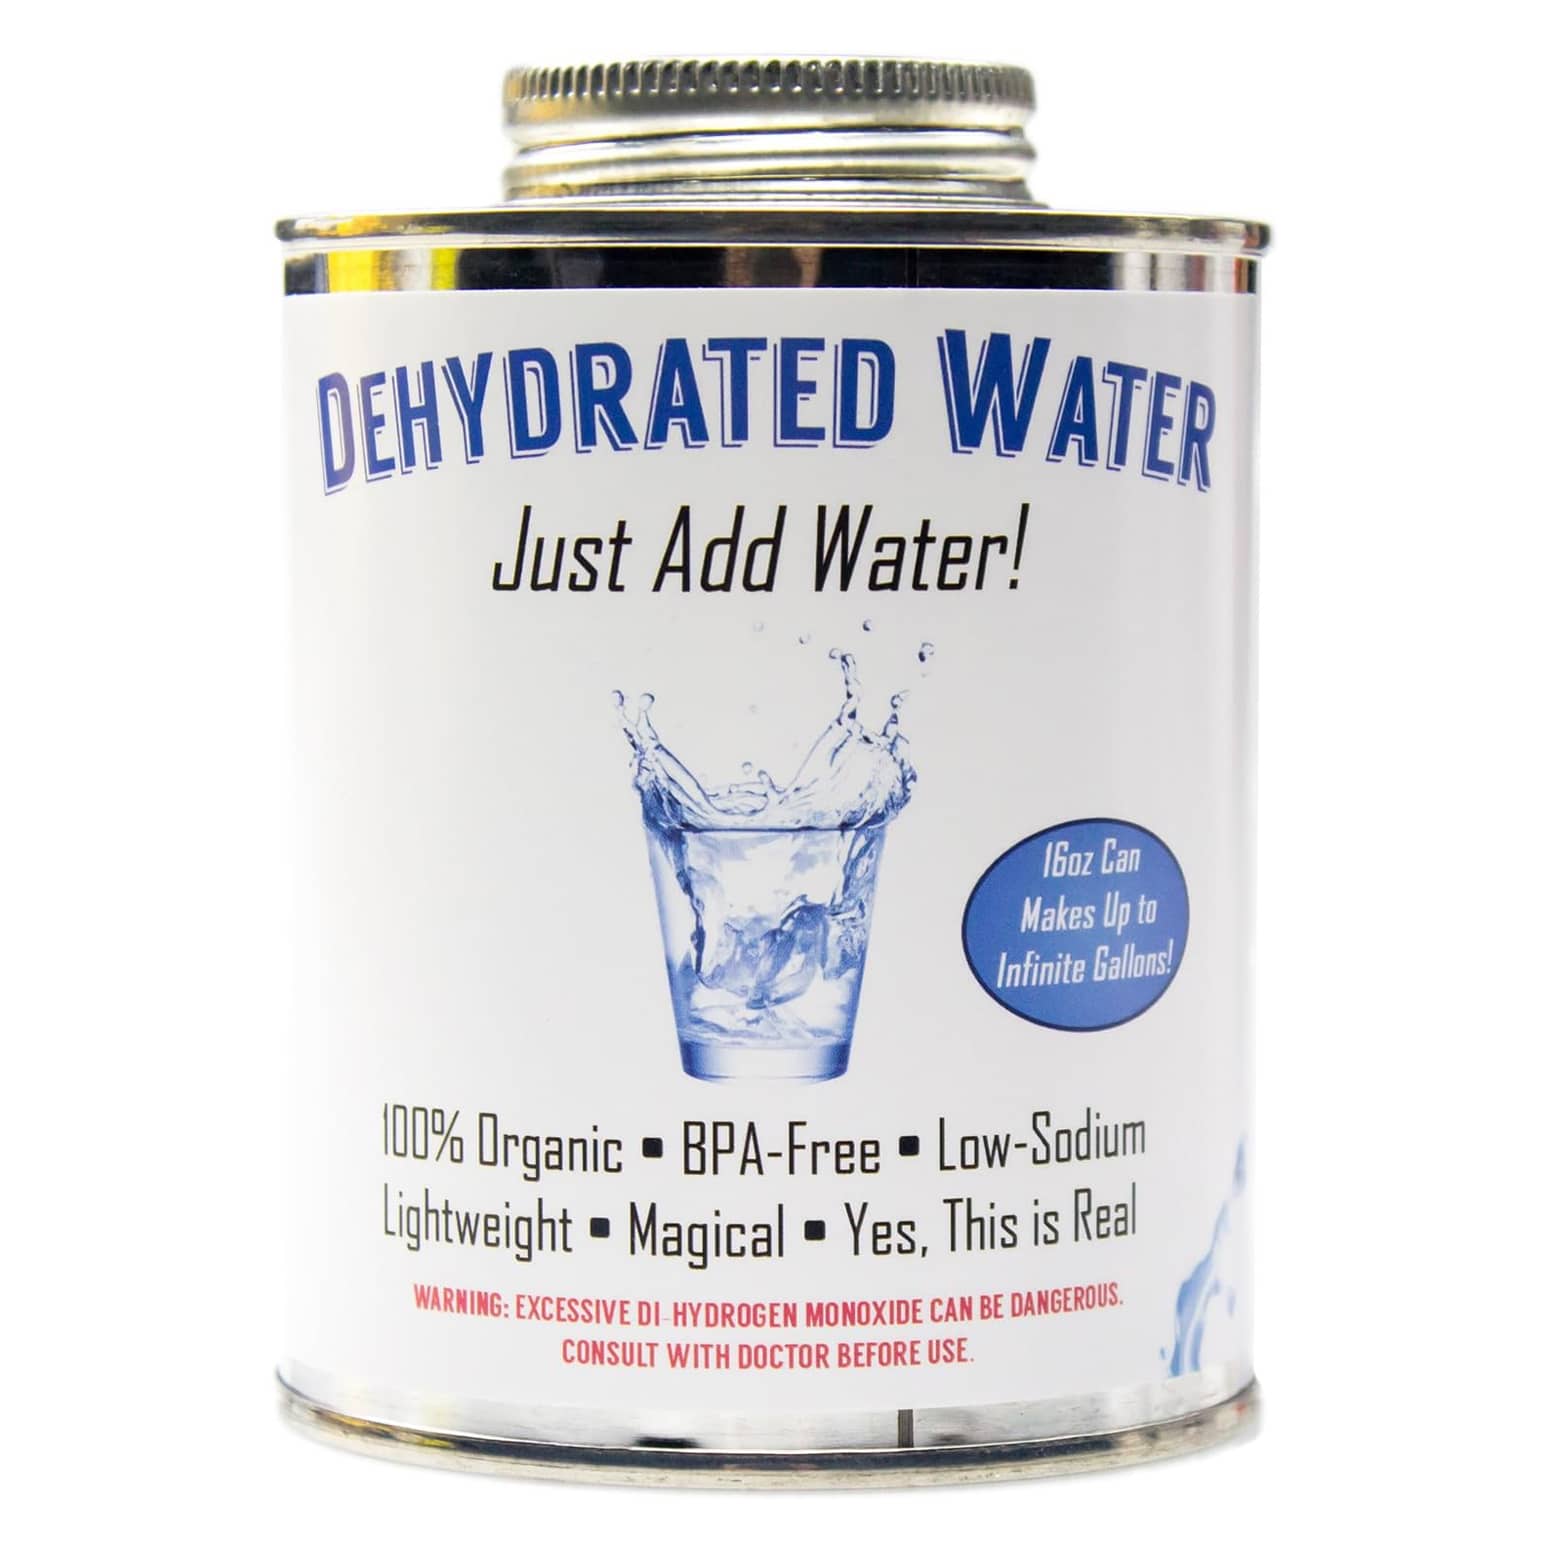 can-of-dehydrated-water-just-add-water-xl.jpg